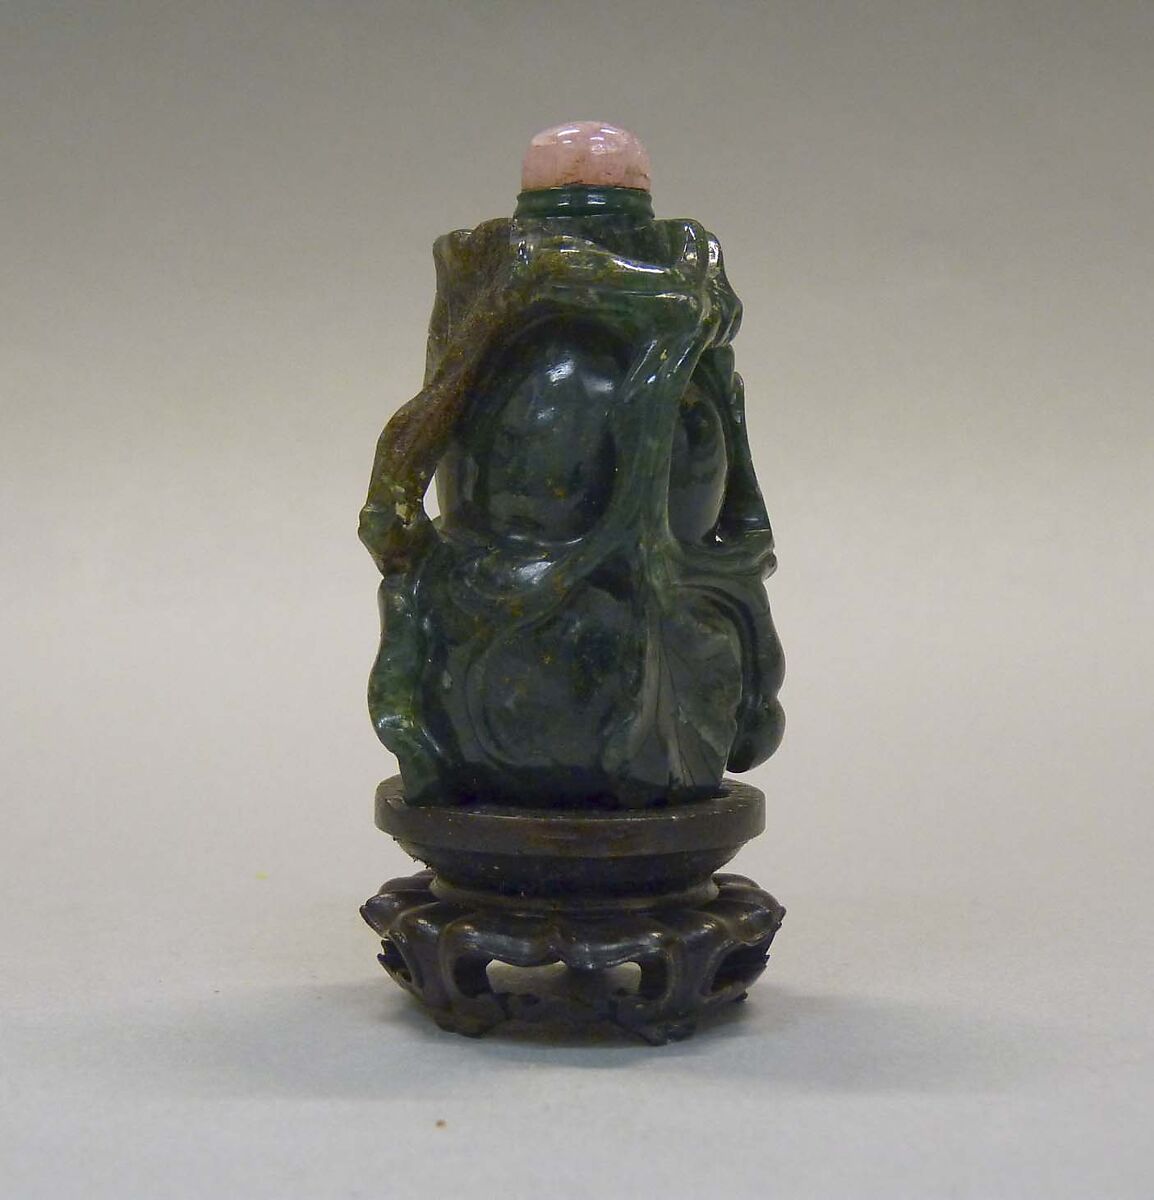 Snuff Bottle, Bloodstone agate with pink tourmaline stopper, China 